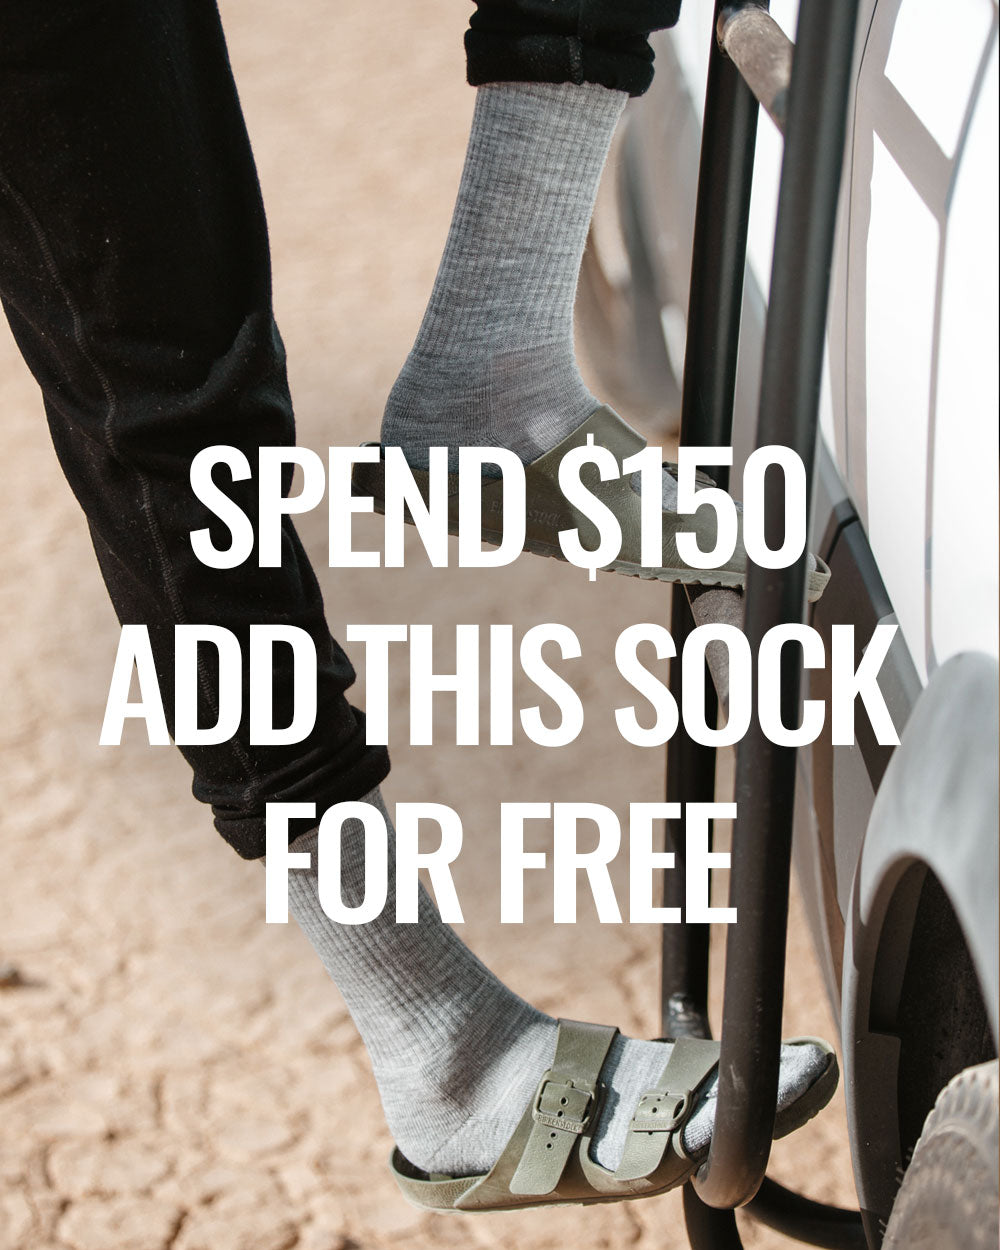 Free Sock Deal. Spend $150. Get this sock free. – Woolly Clothing Co